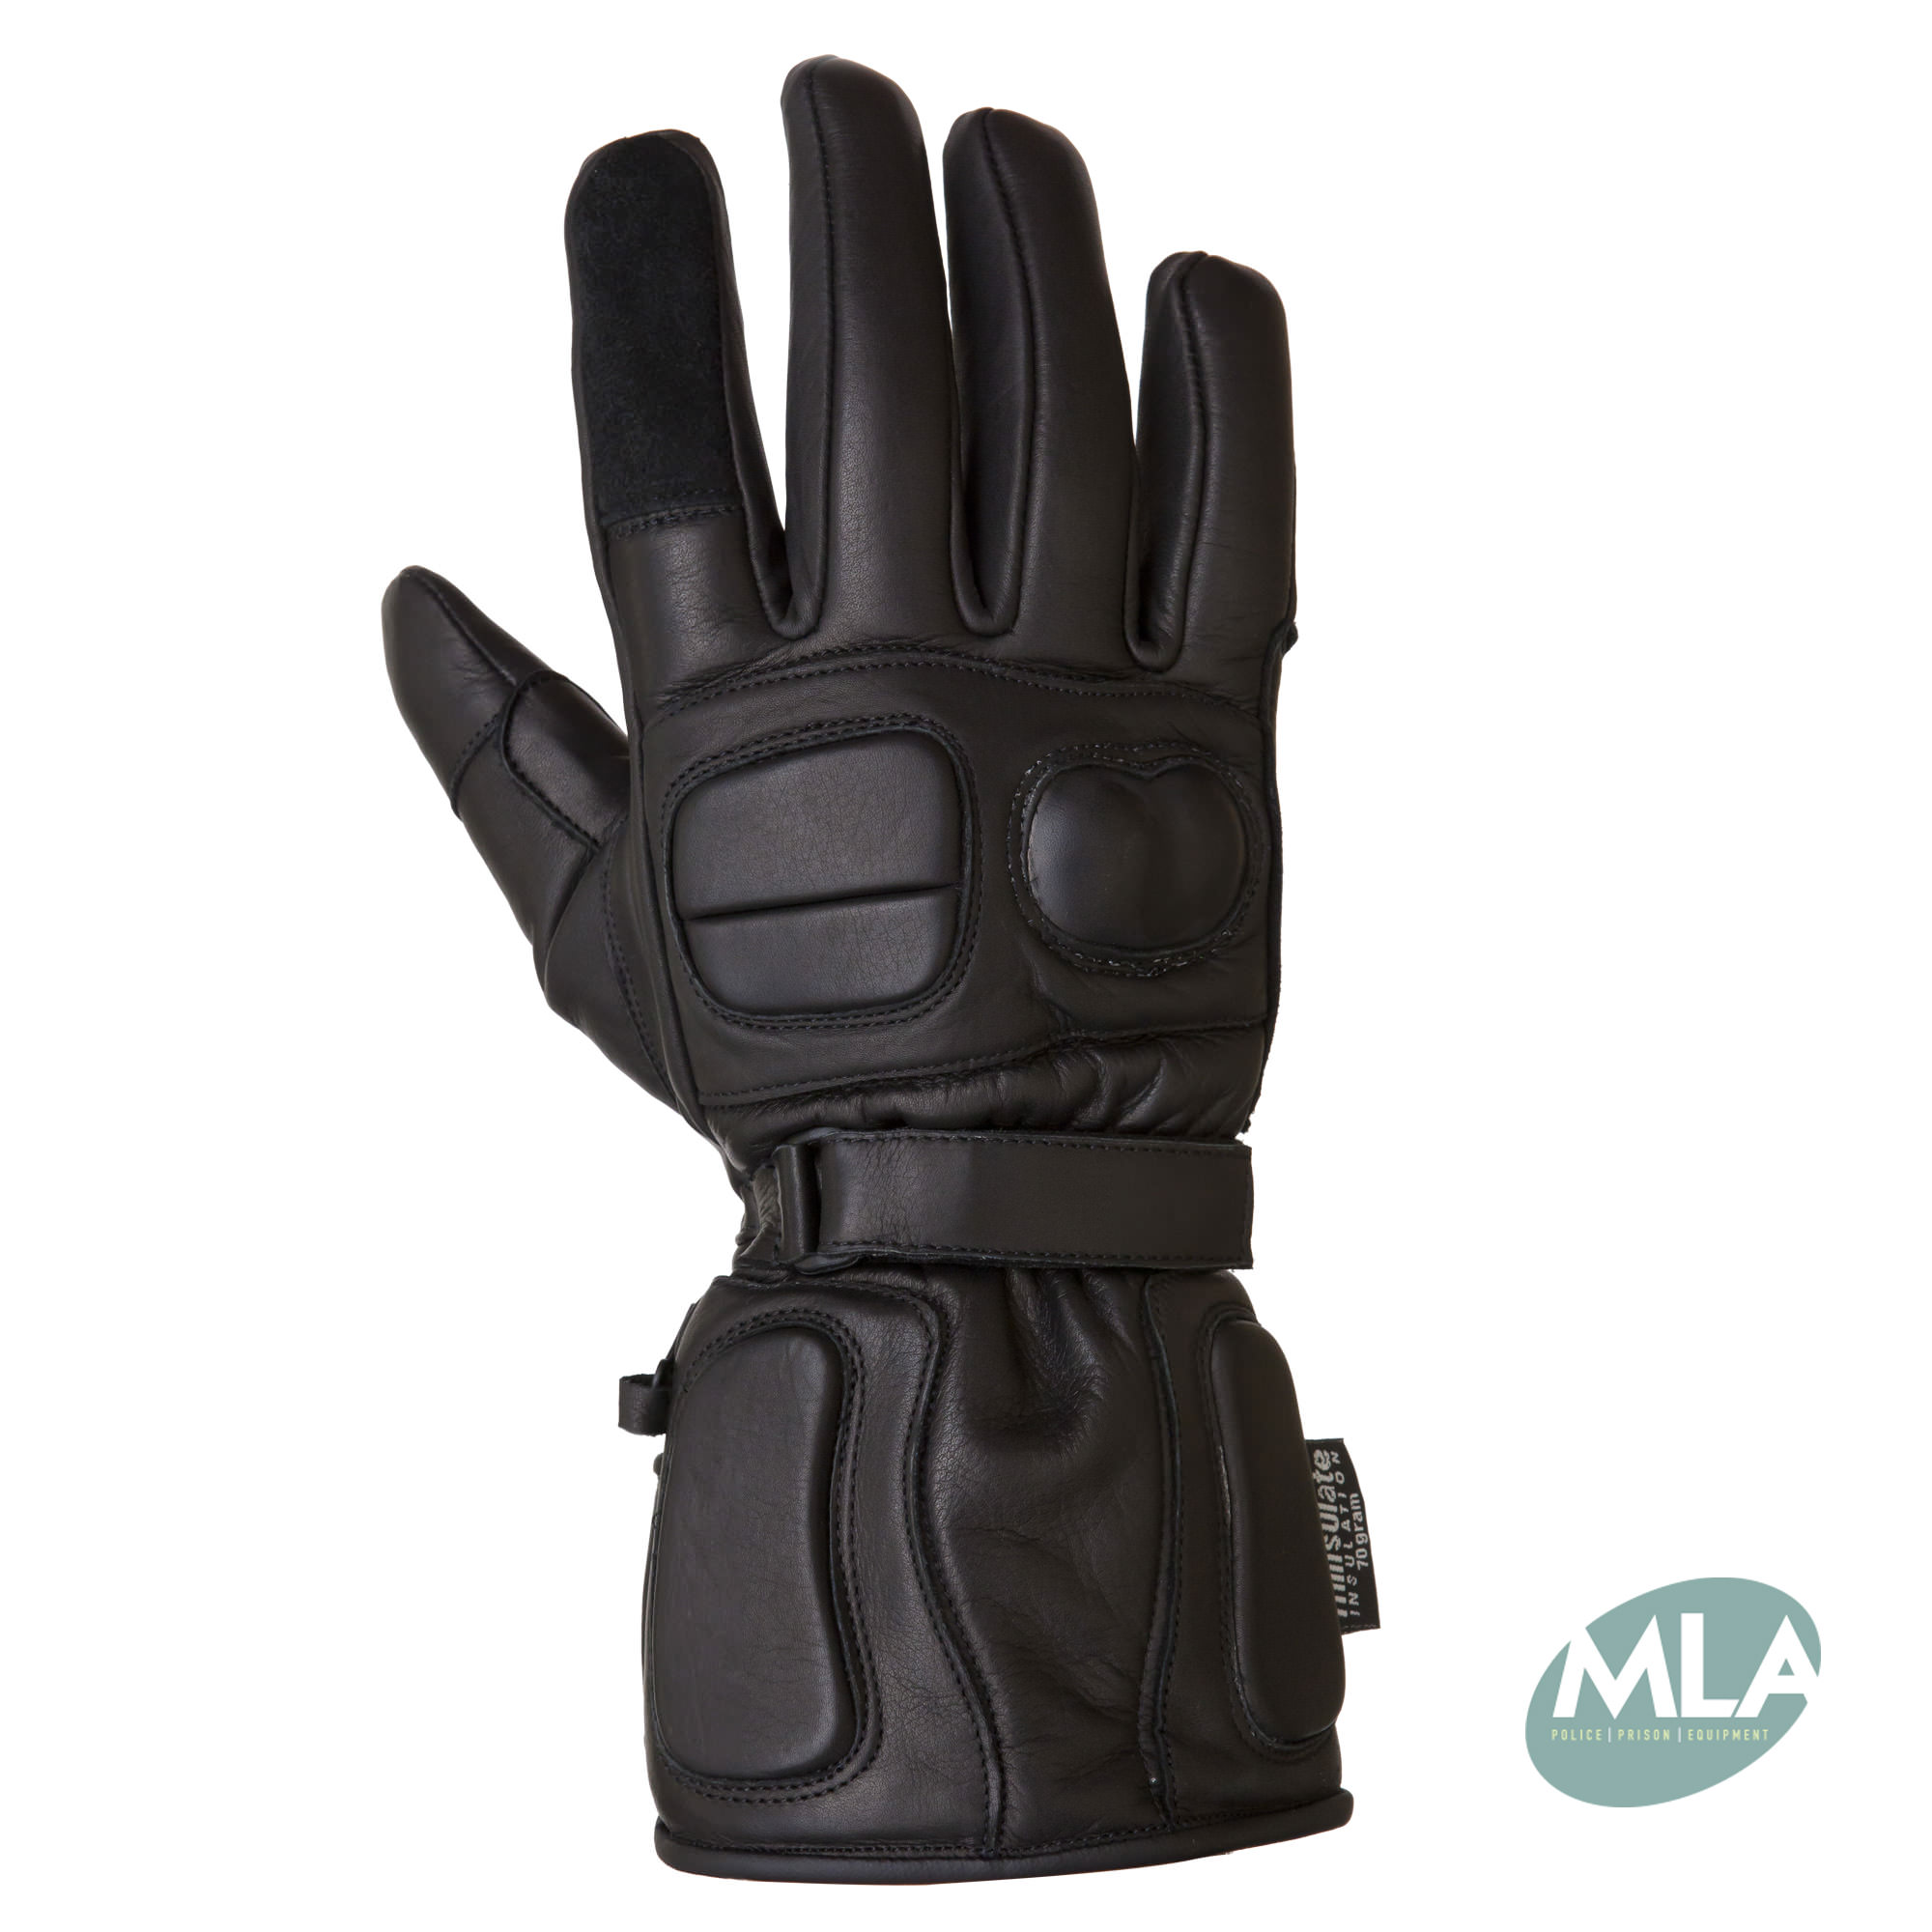 New Winter Motorcycle Gloves